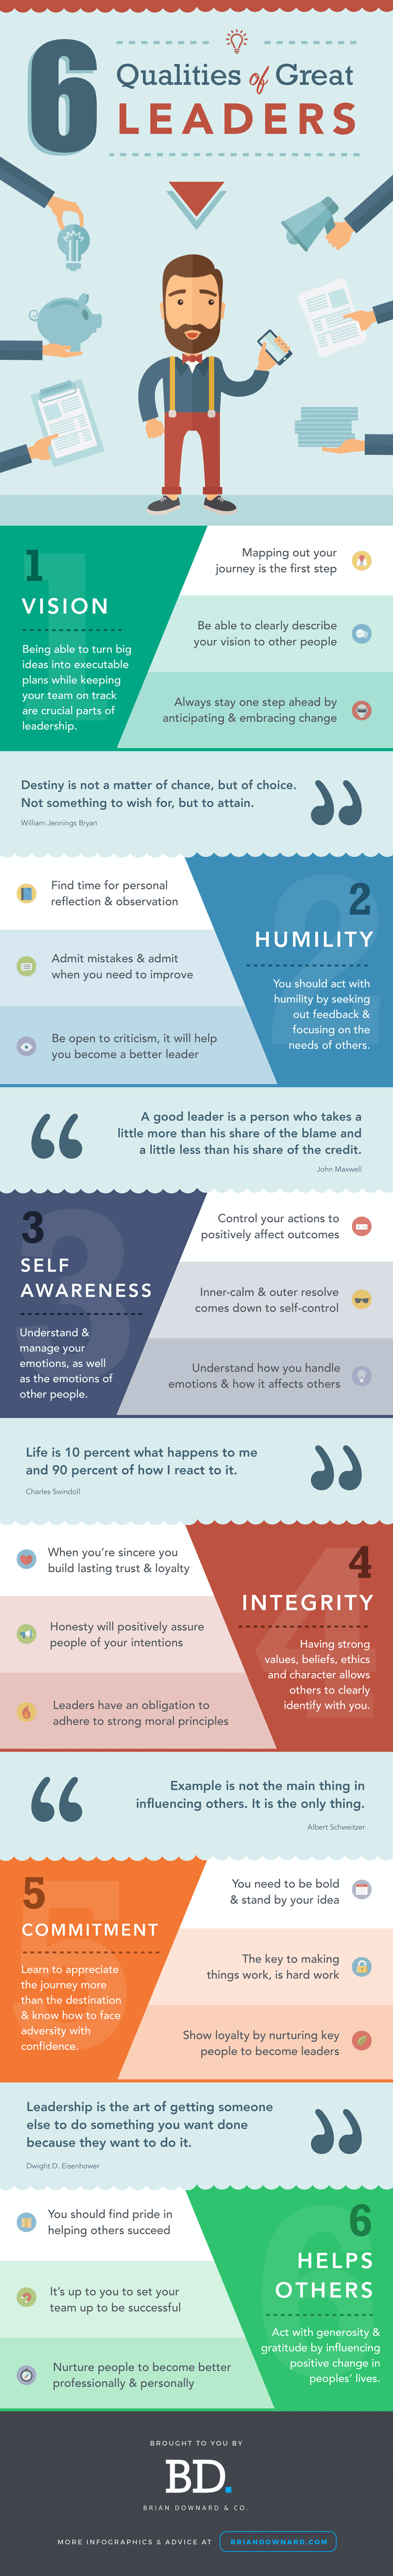 6 Qualities of All Great Leaders [INFOGRAPHIC]